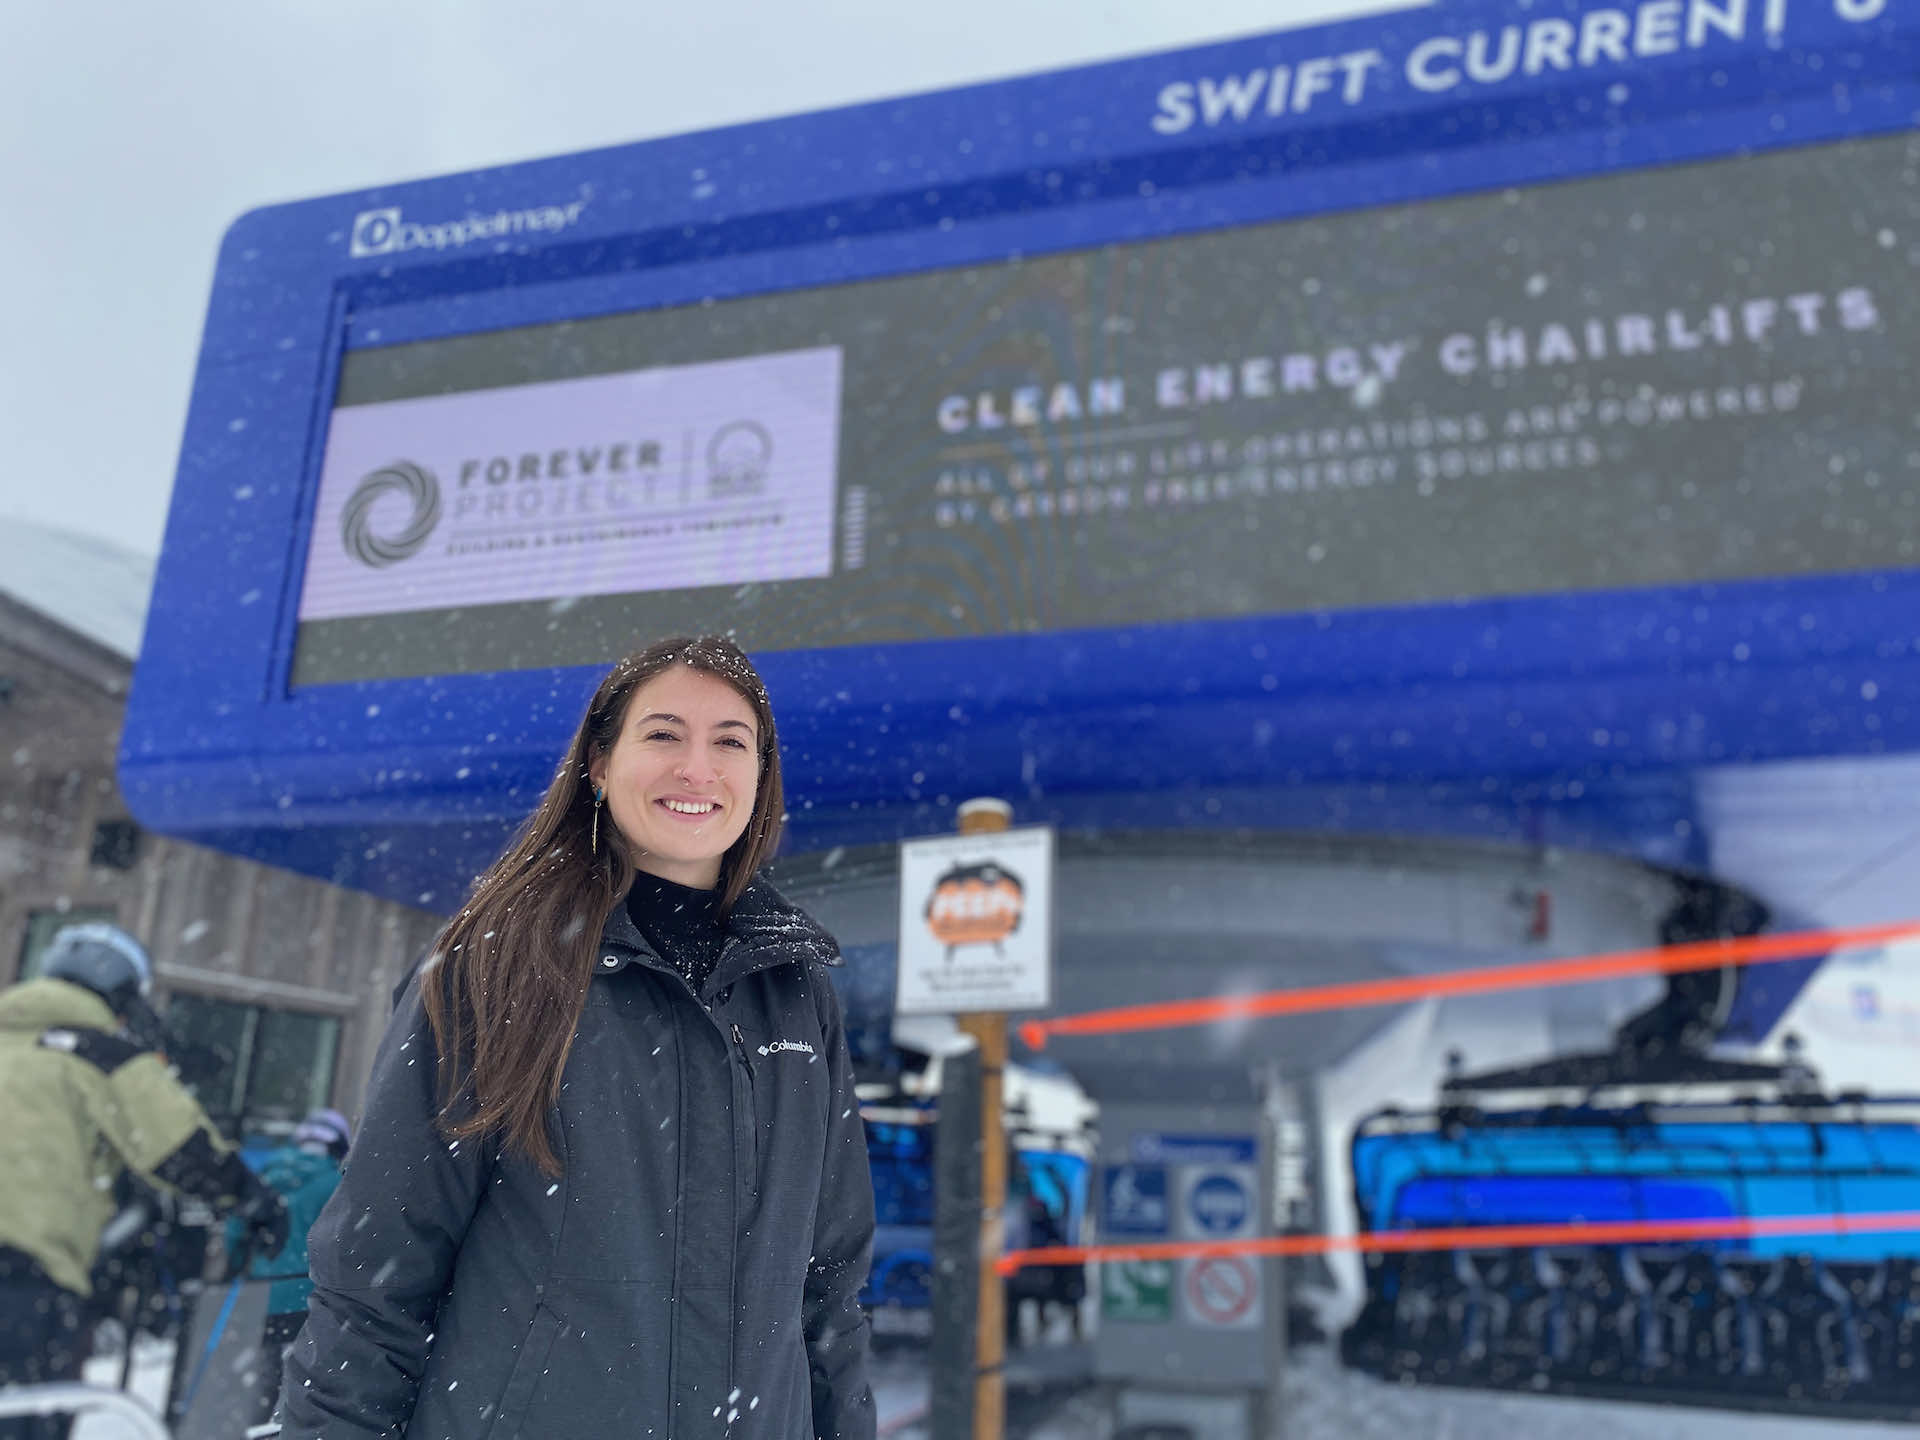 Amy stands in front of Swift Current 6